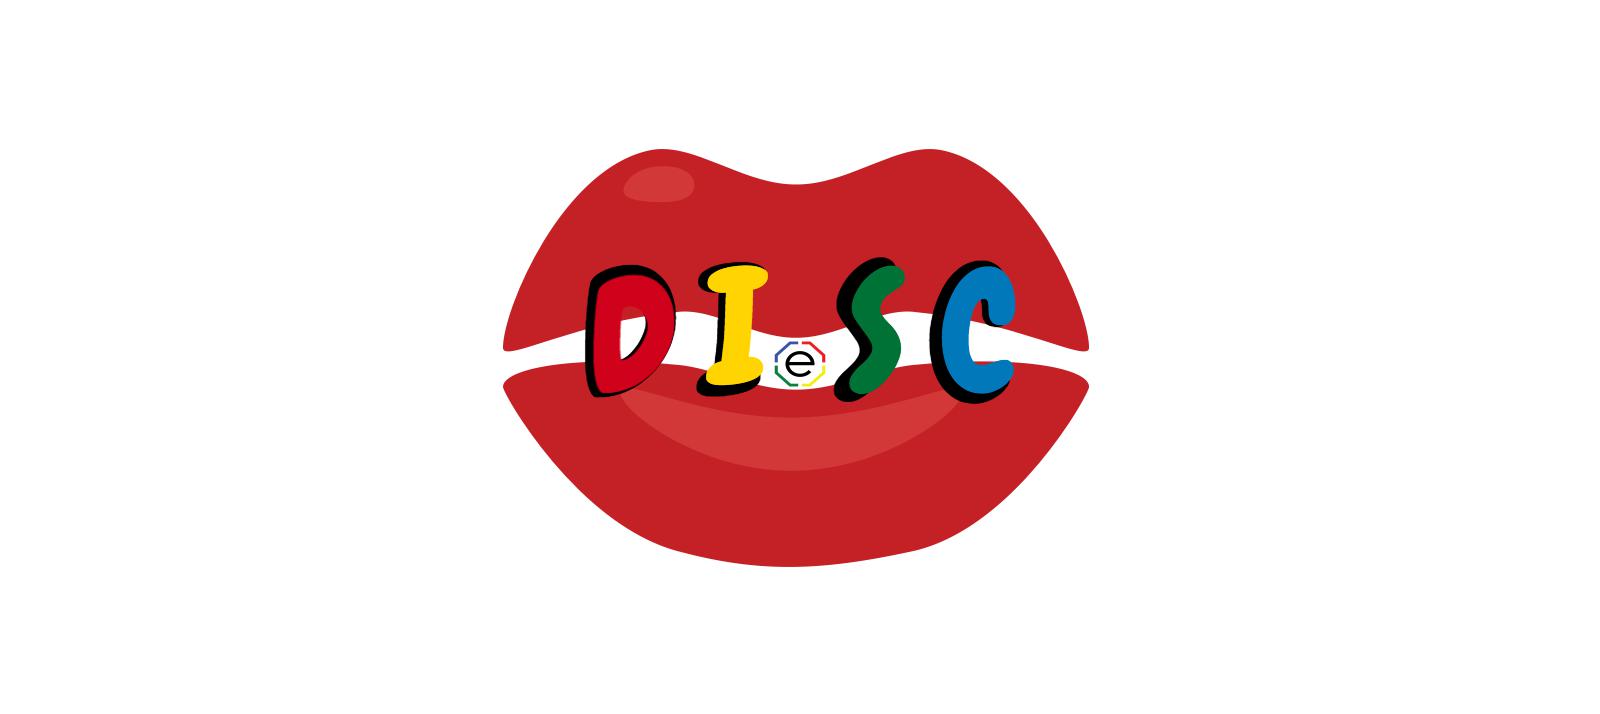 KISS My DISC: Simple DISC Approach Works Best